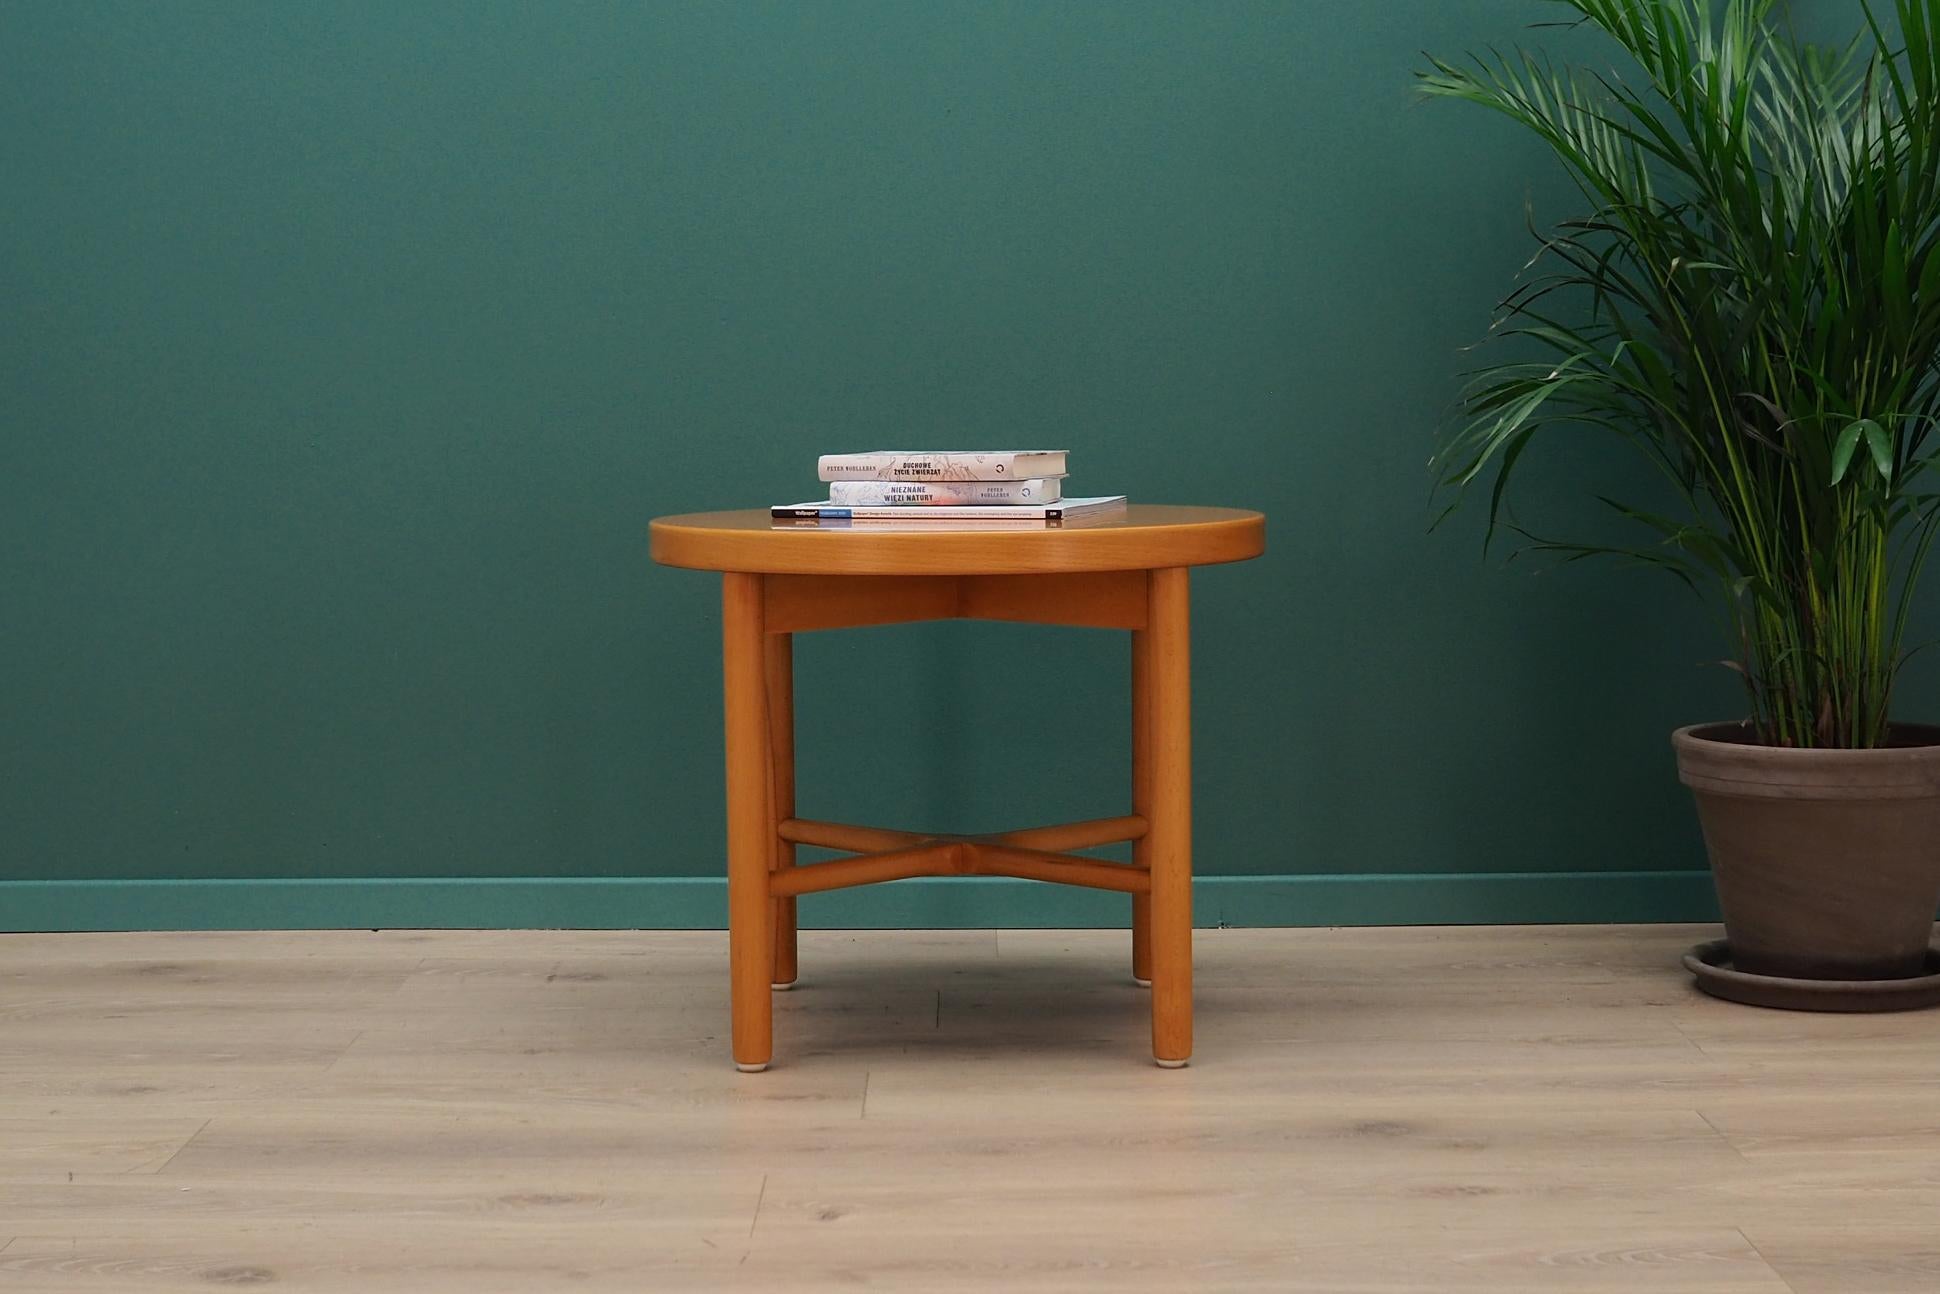 Classic coffee table from the 1960s-1970s. Scandinavian design, Minimalist form. Made in the Farstrup manufacture. Tabletop finished with beech veneer, legs made of solid beechwood. Preserved in good condition (small bruises and scratches) -